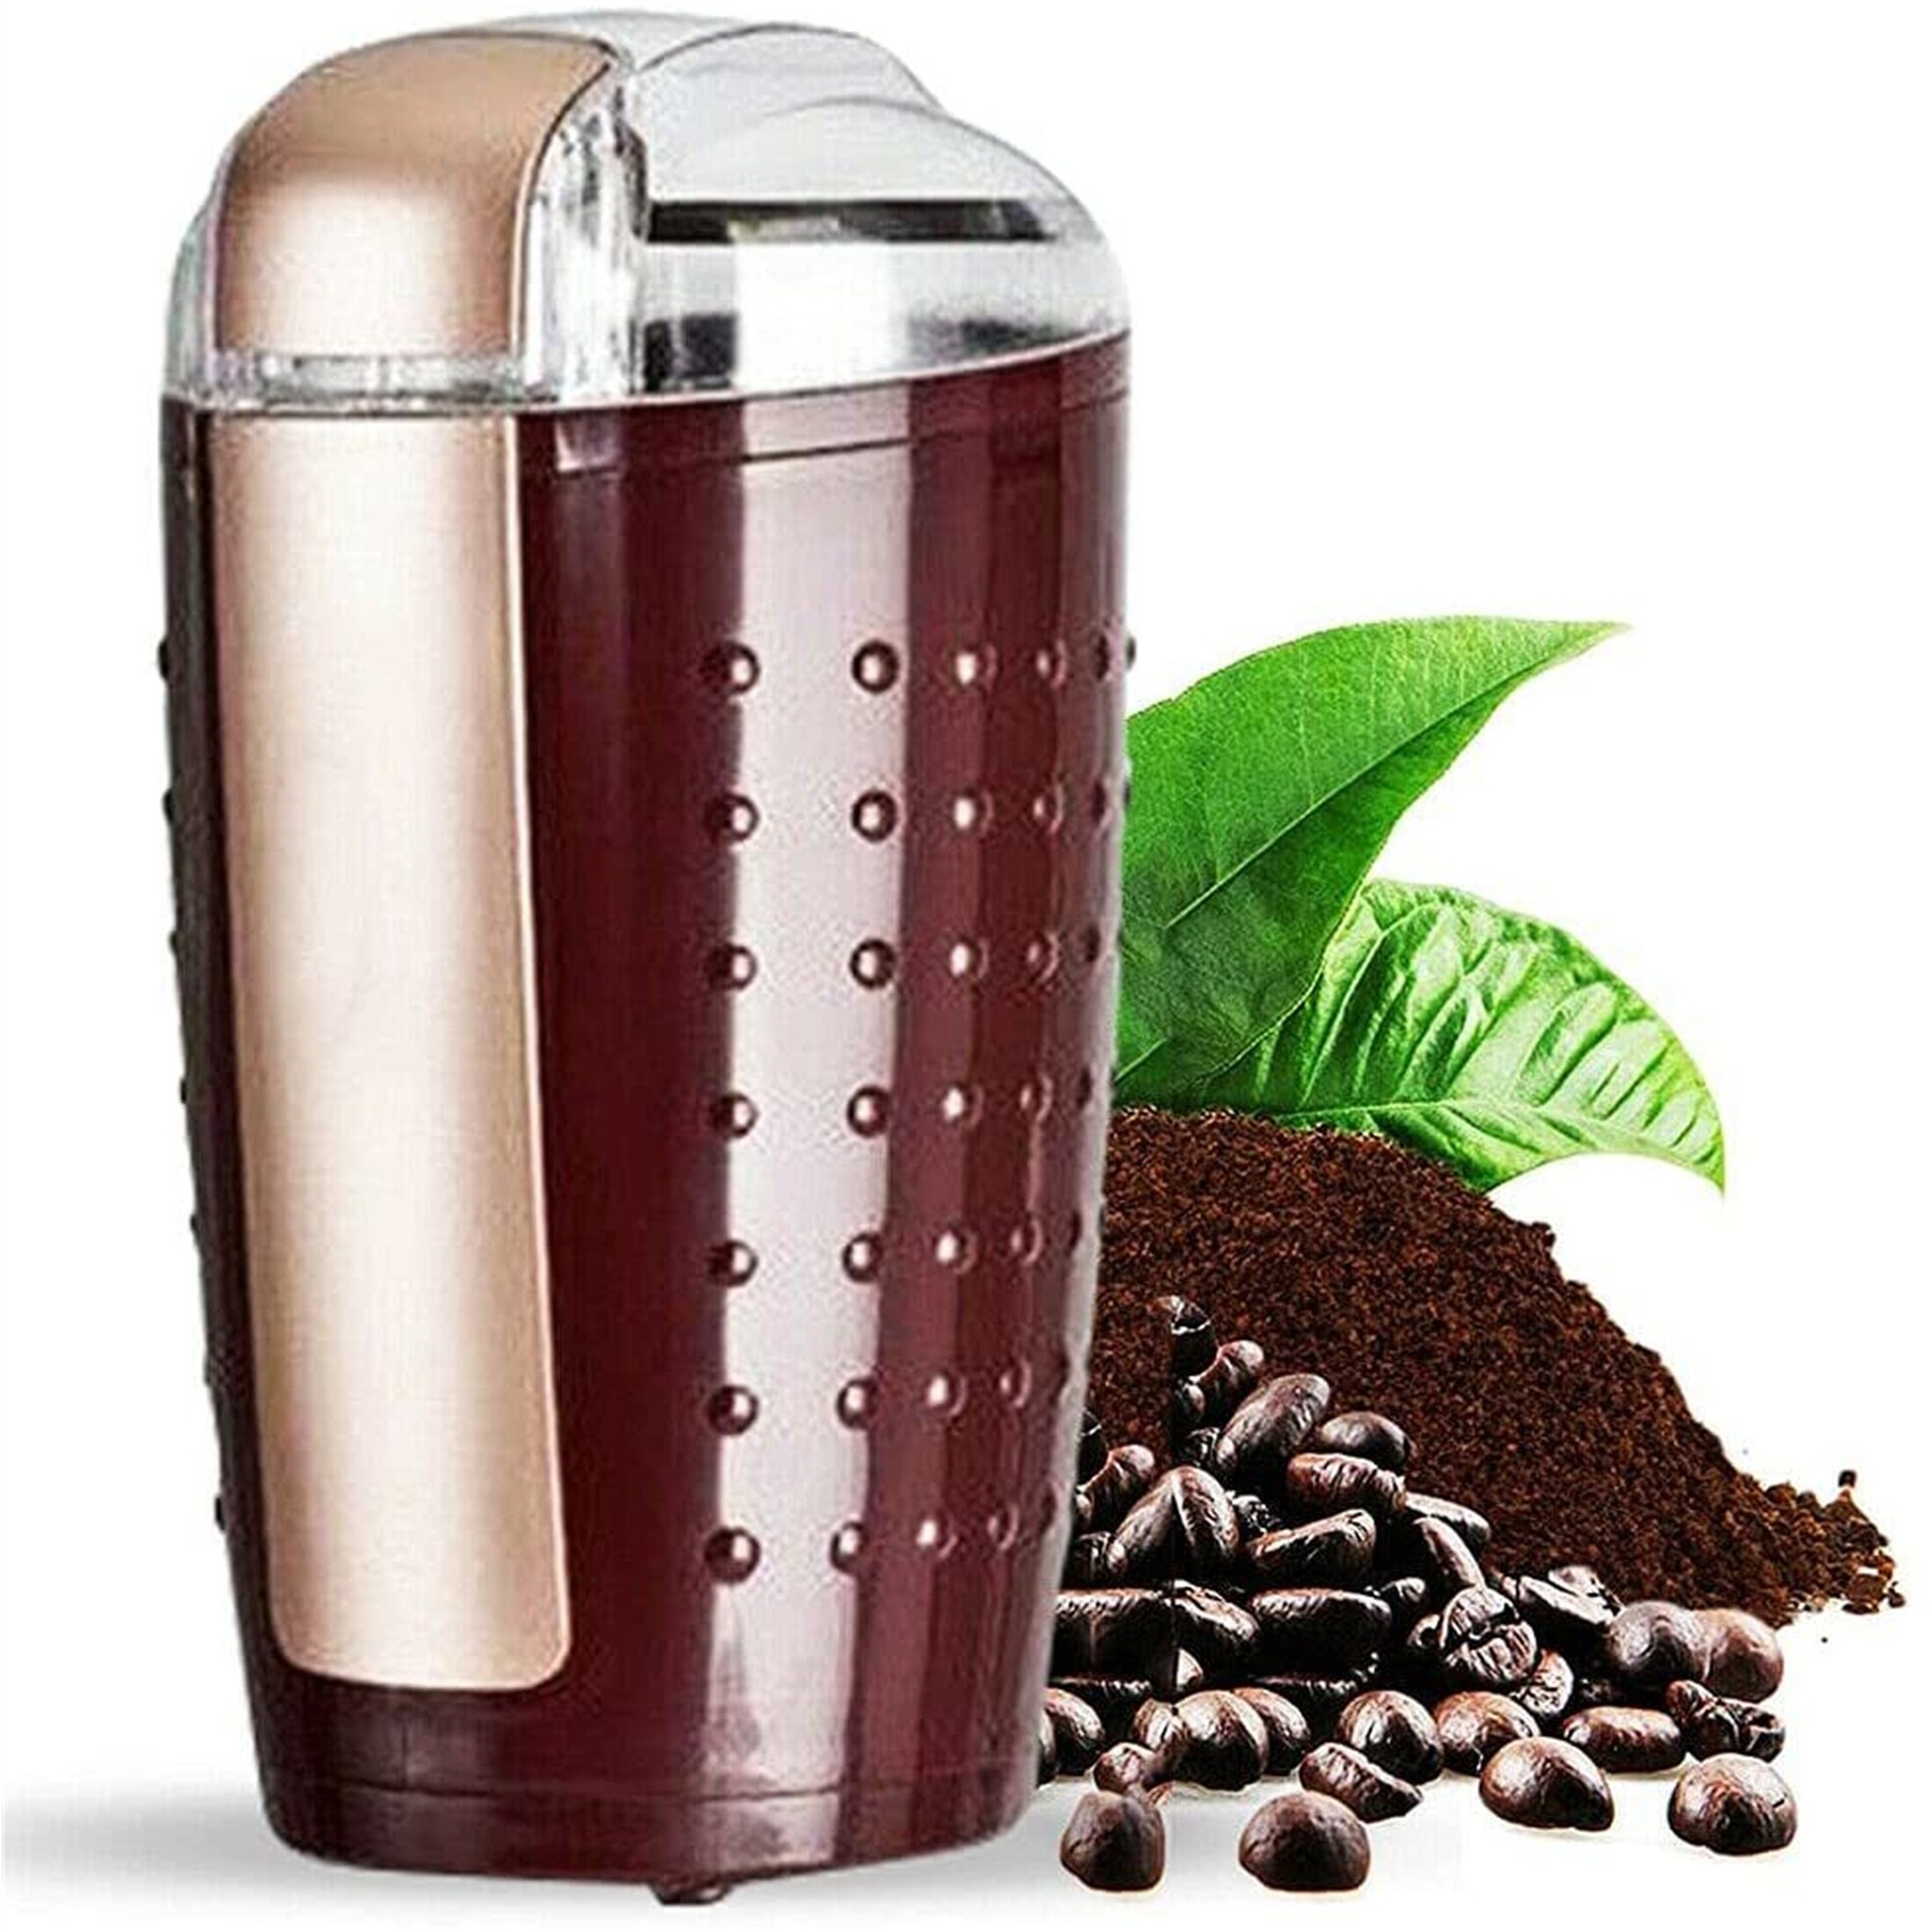 Coffee and Spice Grinder Onyx Black BCG211OB